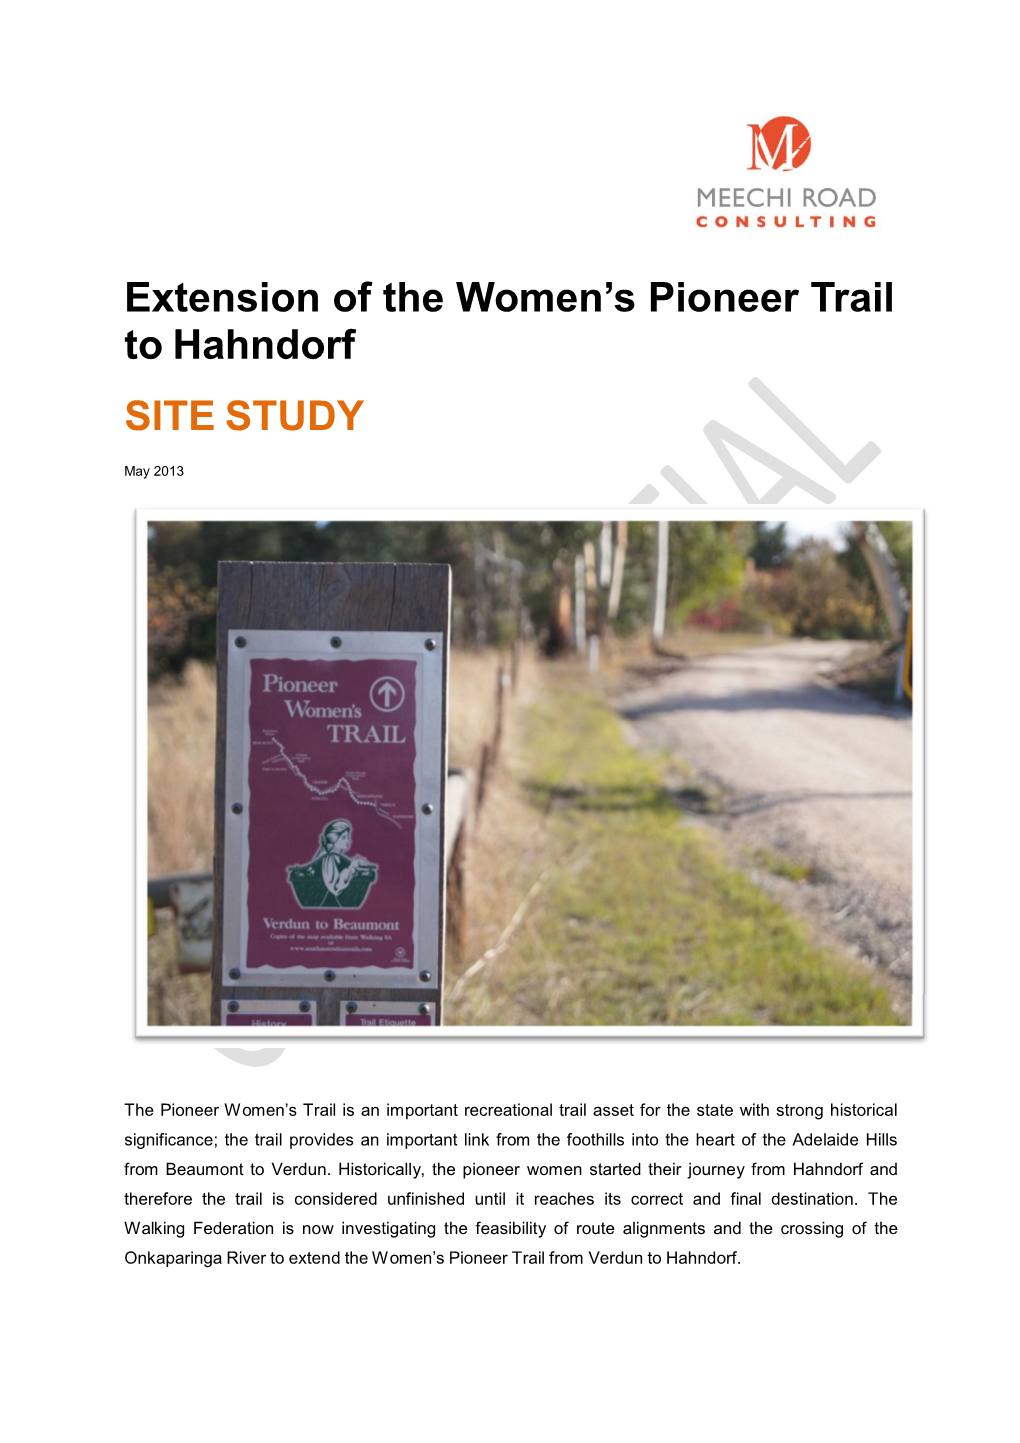 Extension of the Women's Pioneer Trail to Hahndorf SITE STUDY